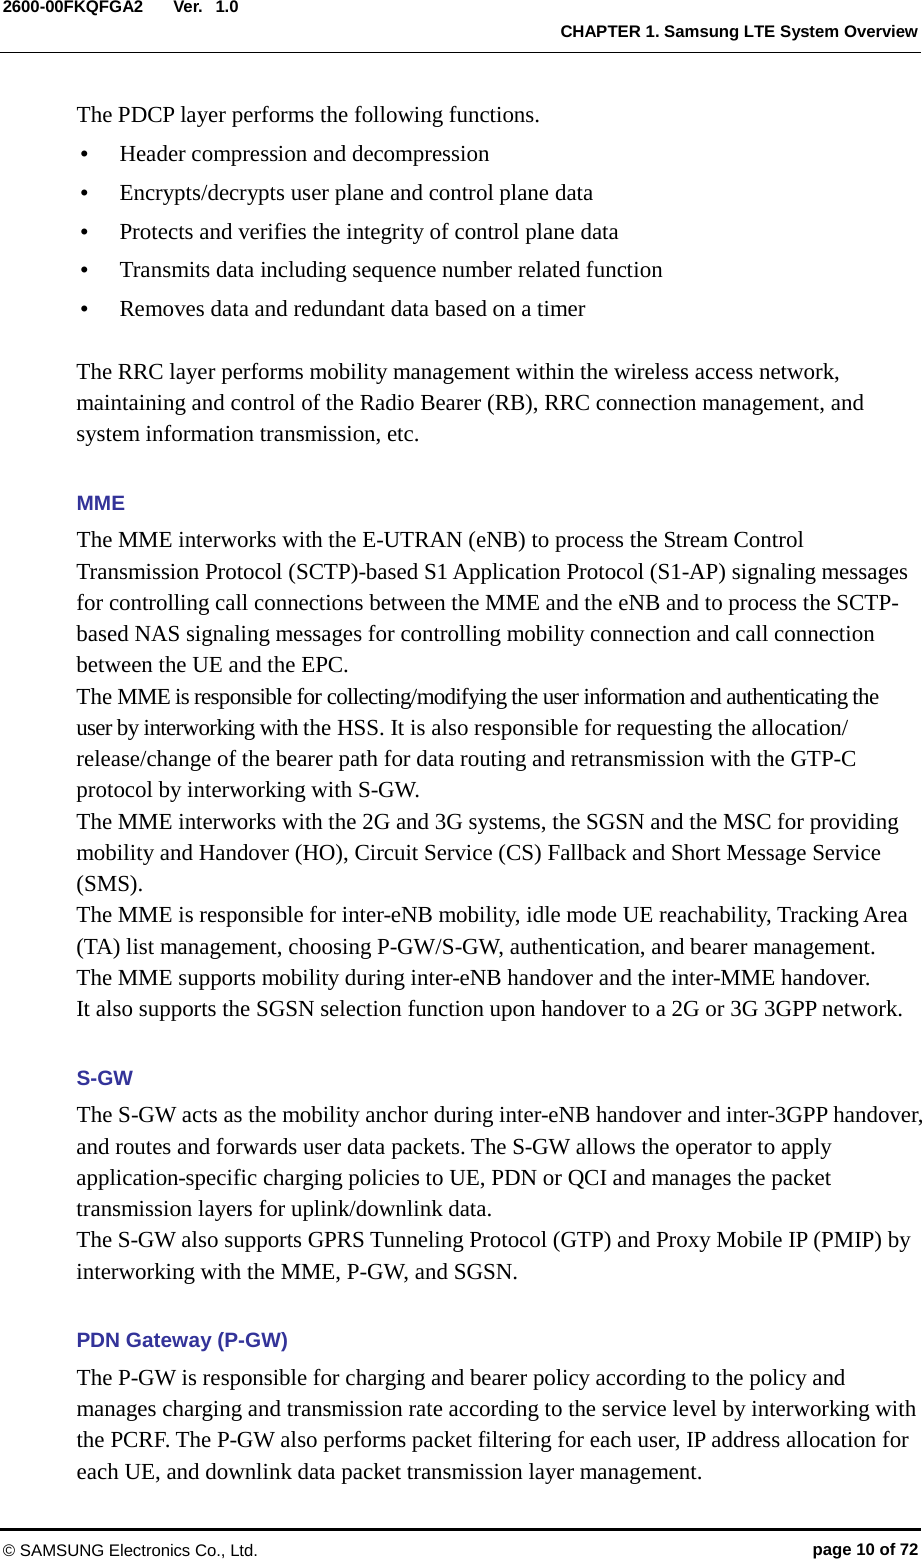  Ver.  CHAPTER 1. Samsung LTE System Overview 2600-00FKQFGA2 1.0 The PDCP layer performs the following functions.    Header compression and decompression  Encrypts/decrypts user plane and control plane data  Protects and verifies the integrity of control plane data  Transmits data including sequence number related function  Removes data and redundant data based on a timer  The RRC layer performs mobility management within the wireless access network, maintaining and control of the Radio Bearer (RB), RRC connection management, and system information transmission, etc.  MME The MME interworks with the E-UTRAN (eNB) to process the Stream Control Transmission Protocol (SCTP)-based S1 Application Protocol (S1-AP) signaling messages for controlling call connections between the MME and the eNB and to process the SCTP-based NAS signaling messages for controlling mobility connection and call connection between the UE and the EPC.   The MME is responsible for collecting/modifying the user information and authenticating the user by interworking with the HSS. It is also responsible for requesting the allocation/ release/change of the bearer path for data routing and retransmission with the GTP-C protocol by interworking with S-GW.   The MME interworks with the 2G and 3G systems, the SGSN and the MSC for providing mobility and Handover (HO), Circuit Service (CS) Fallback and Short Message Service (SMS).   The MME is responsible for inter-eNB mobility, idle mode UE reachability, Tracking Area (TA) list management, choosing P-GW/S-GW, authentication, and bearer management. The MME supports mobility during inter-eNB handover and the inter-MME handover.   It also supports the SGSN selection function upon handover to a 2G or 3G 3GPP network.  S-GW The S-GW acts as the mobility anchor during inter-eNB handover and inter-3GPP handover, and routes and forwards user data packets. The S-GW allows the operator to apply application-specific charging policies to UE, PDN or QCI and manages the packet transmission layers for uplink/downlink data.   The S-GW also supports GPRS Tunneling Protocol (GTP) and Proxy Mobile IP (PMIP) by interworking with the MME, P-GW, and SGSN.  PDN Gateway (P-GW) The P-GW is responsible for charging and bearer policy according to the policy and manages charging and transmission rate according to the service level by interworking with the PCRF. The P-GW also performs packet filtering for each user, IP address allocation for each UE, and downlink data packet transmission layer management. © SAMSUNG Electronics Co., Ltd. page 10 of 72 